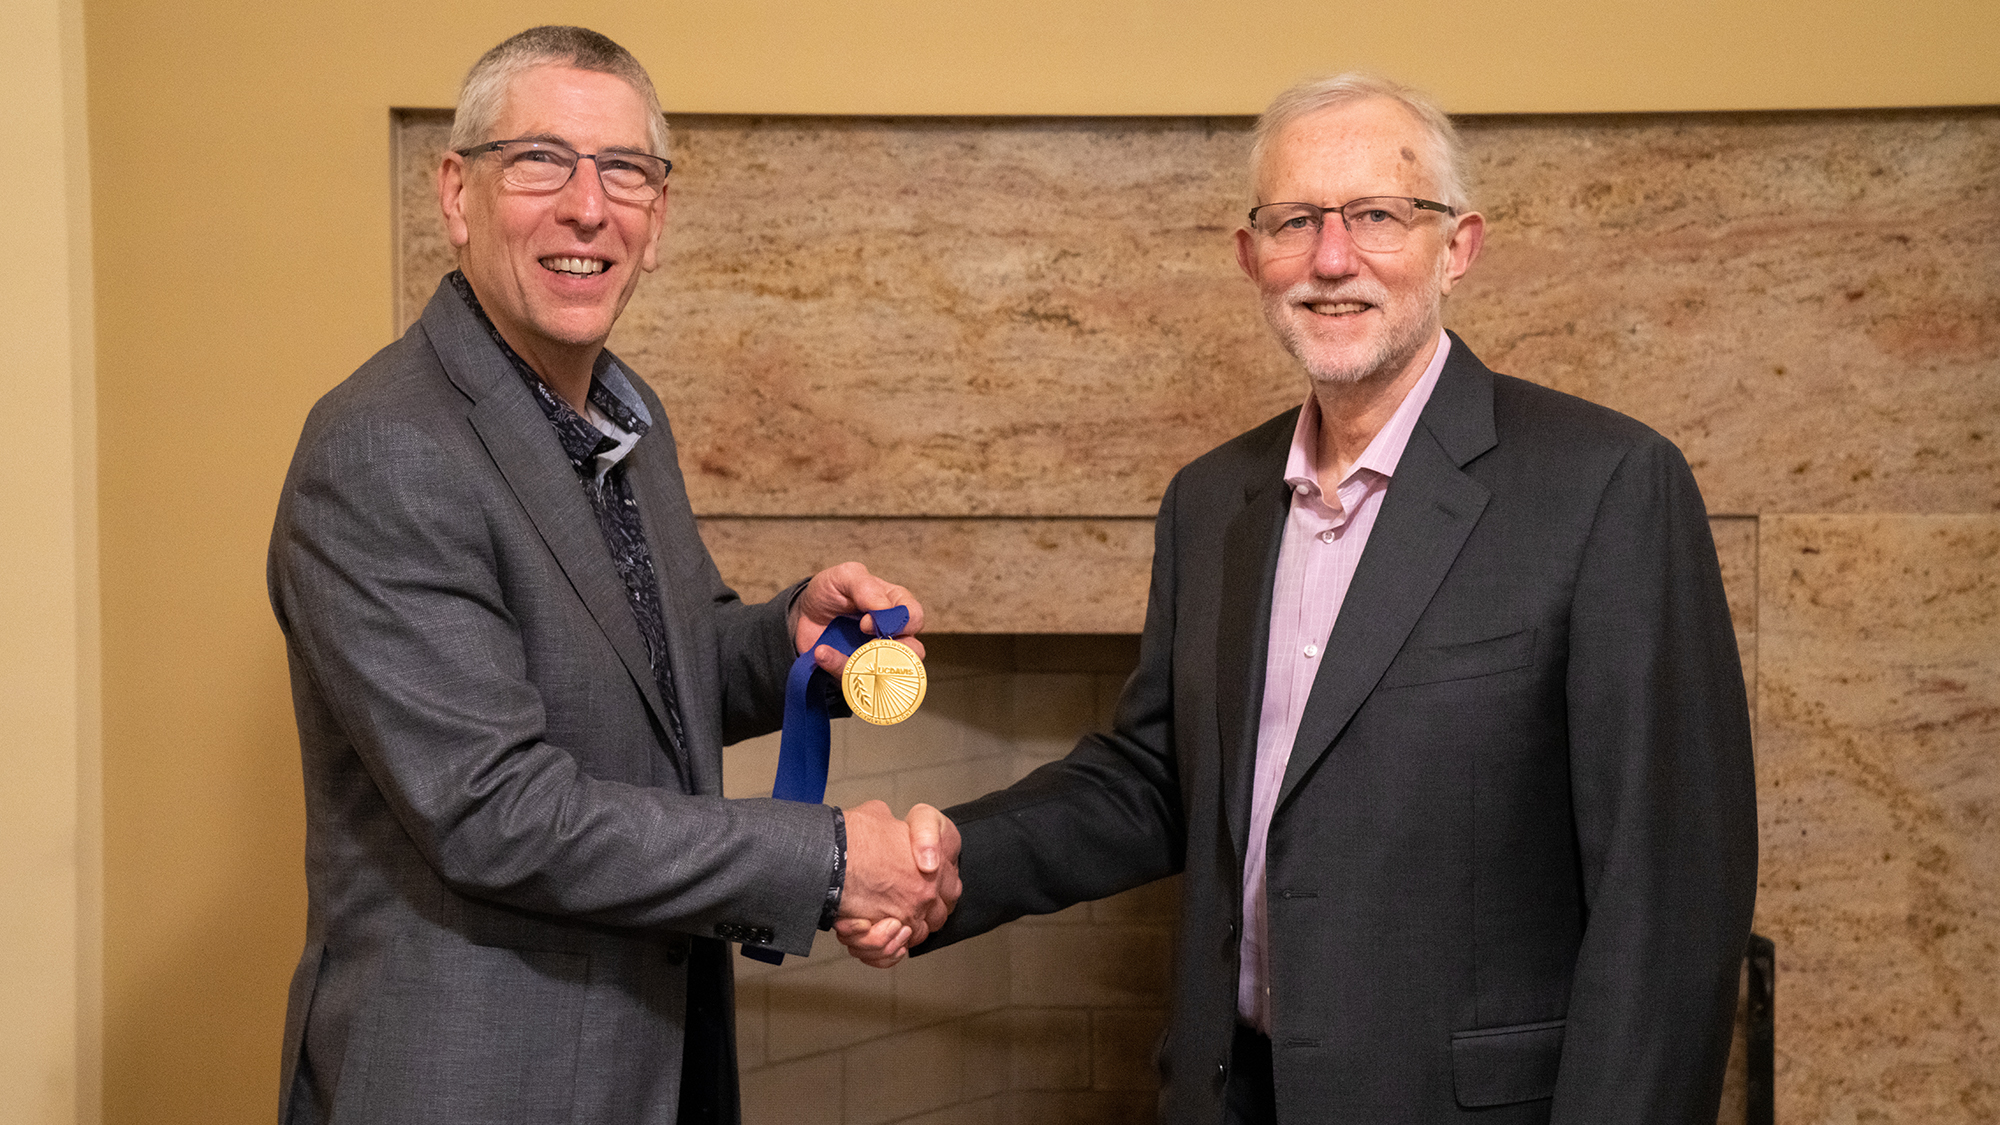 College of Biological Sciences Dean Mark Winey (left) awards the 2021 UC Davis Medal to Charles Rice, whose groundbreaking research on the Hepatitis C virus also led to the 2020 Nobel Prize in Medicine or Physiology. (Sasha Bakhter / UC Davis)